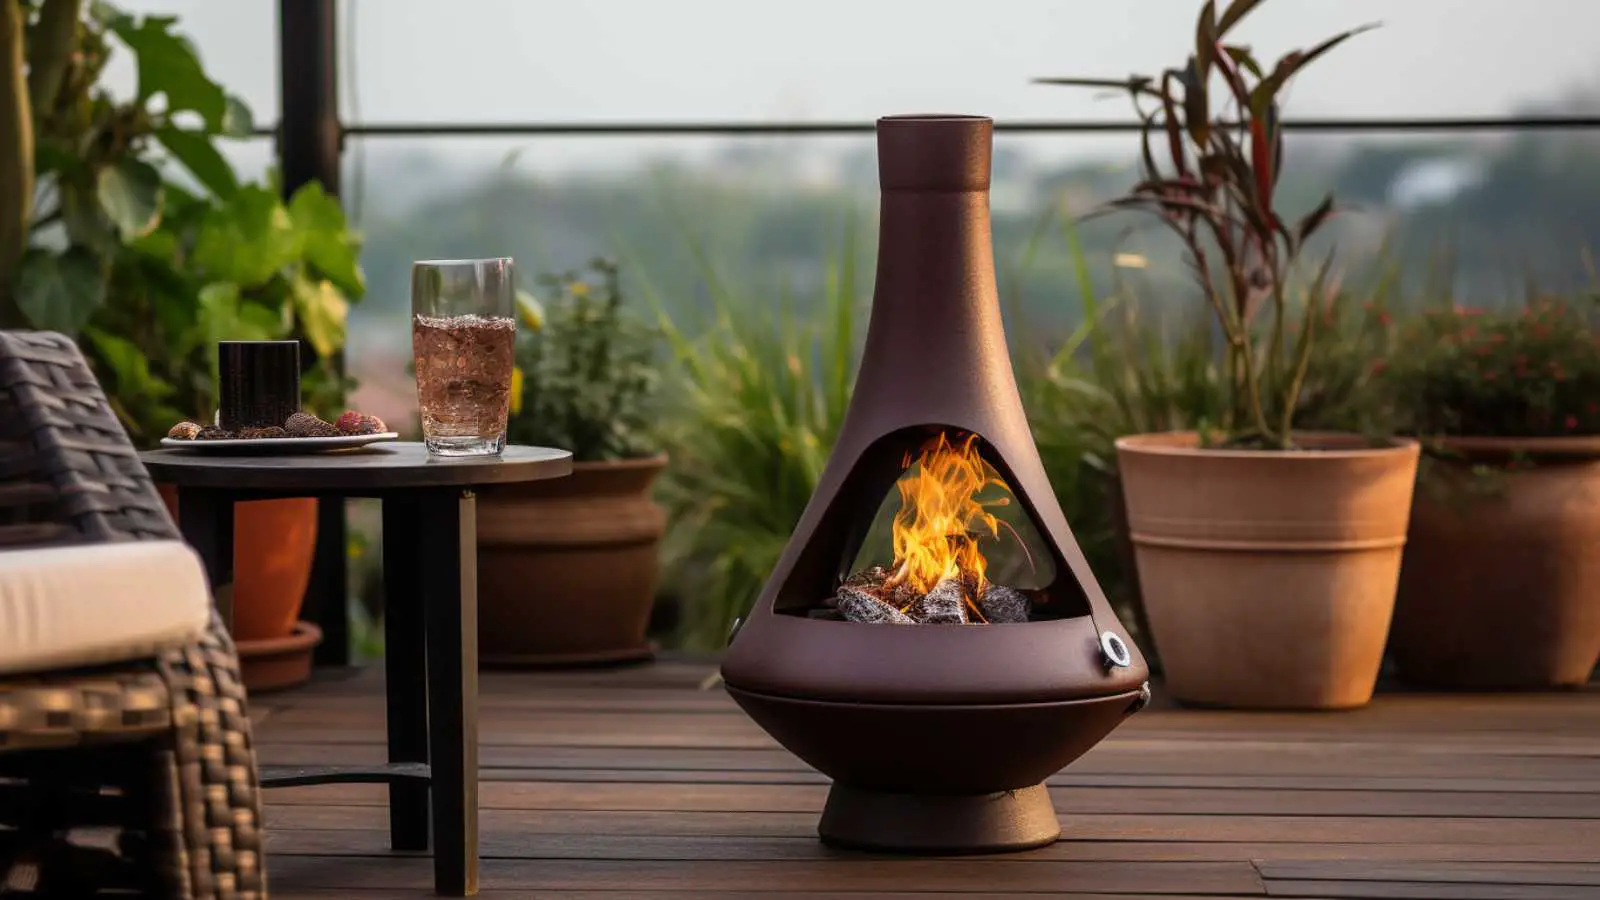 Can Chimineas Be Used On Decks? - Chiminea Uk